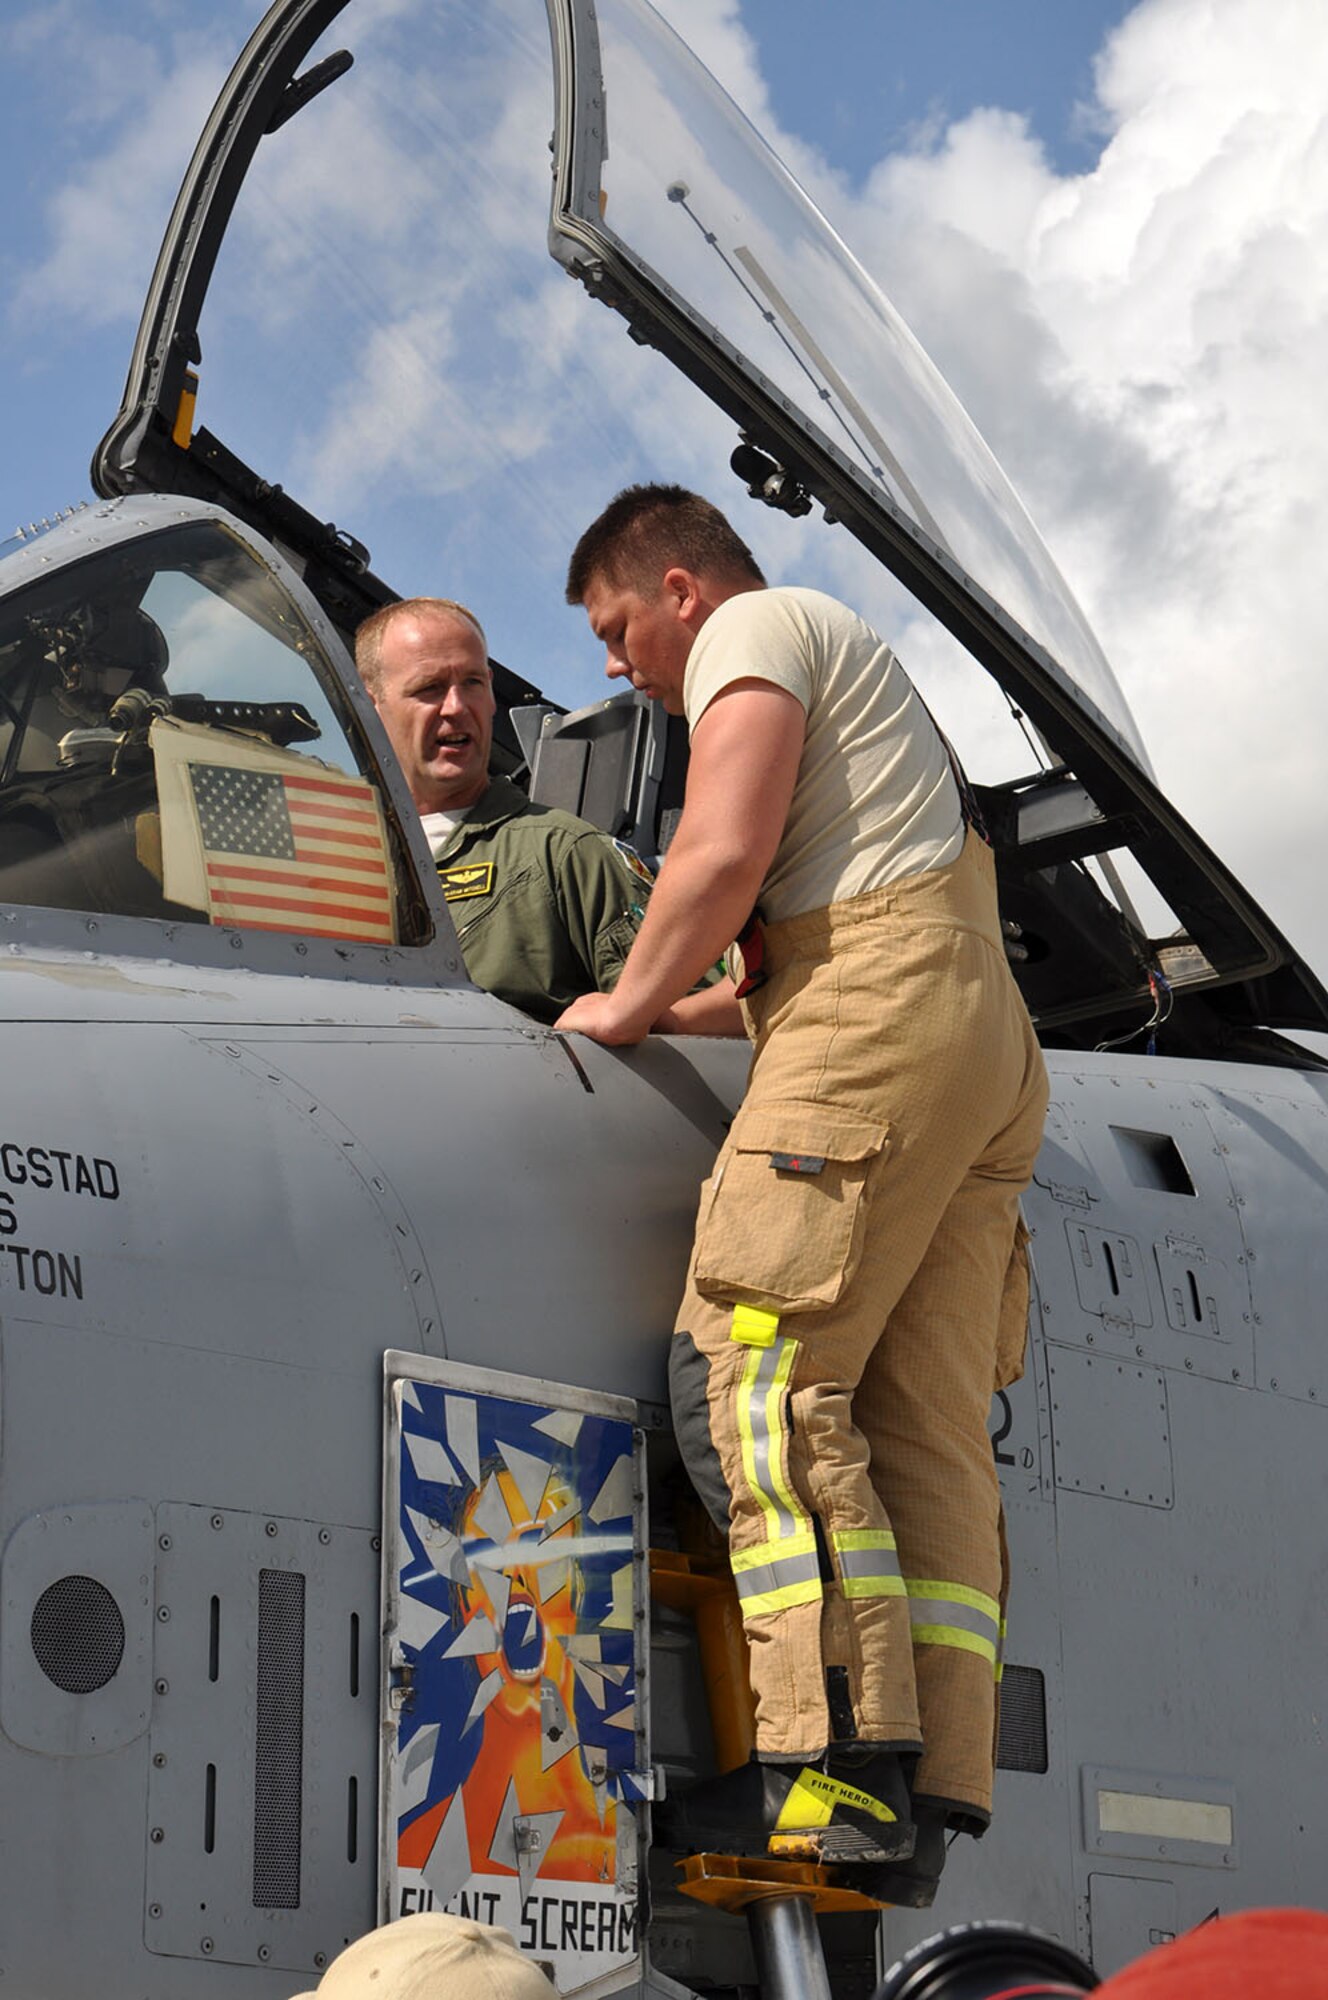 Maj. Rick Mitchell, a 303d Fighter Squadron A-10 Thunderbolt II pilot with the 442d Fighter Wing out of Whiteman Air Force Base, Mo., shows a Latvian firefighter some safety features on the A-10 Aug. 26 at Leilvarde Air Base in Latvia. Mitchell was the first U.S. fighter pilot to land a fighter jet at the airfield. The mission is part of Operation Atlantic Resolve where U.S. forces are partnering with European allies to strengthen their relationship to face potential future challenges. Latvians are learning the safety features of the A-10, how to refuel and how to handle emergencies. The 442d Fighter Wing will be part of the exercise for approximately three weeks. (U.S. Air Force photo by Capt. Denise Haeussler